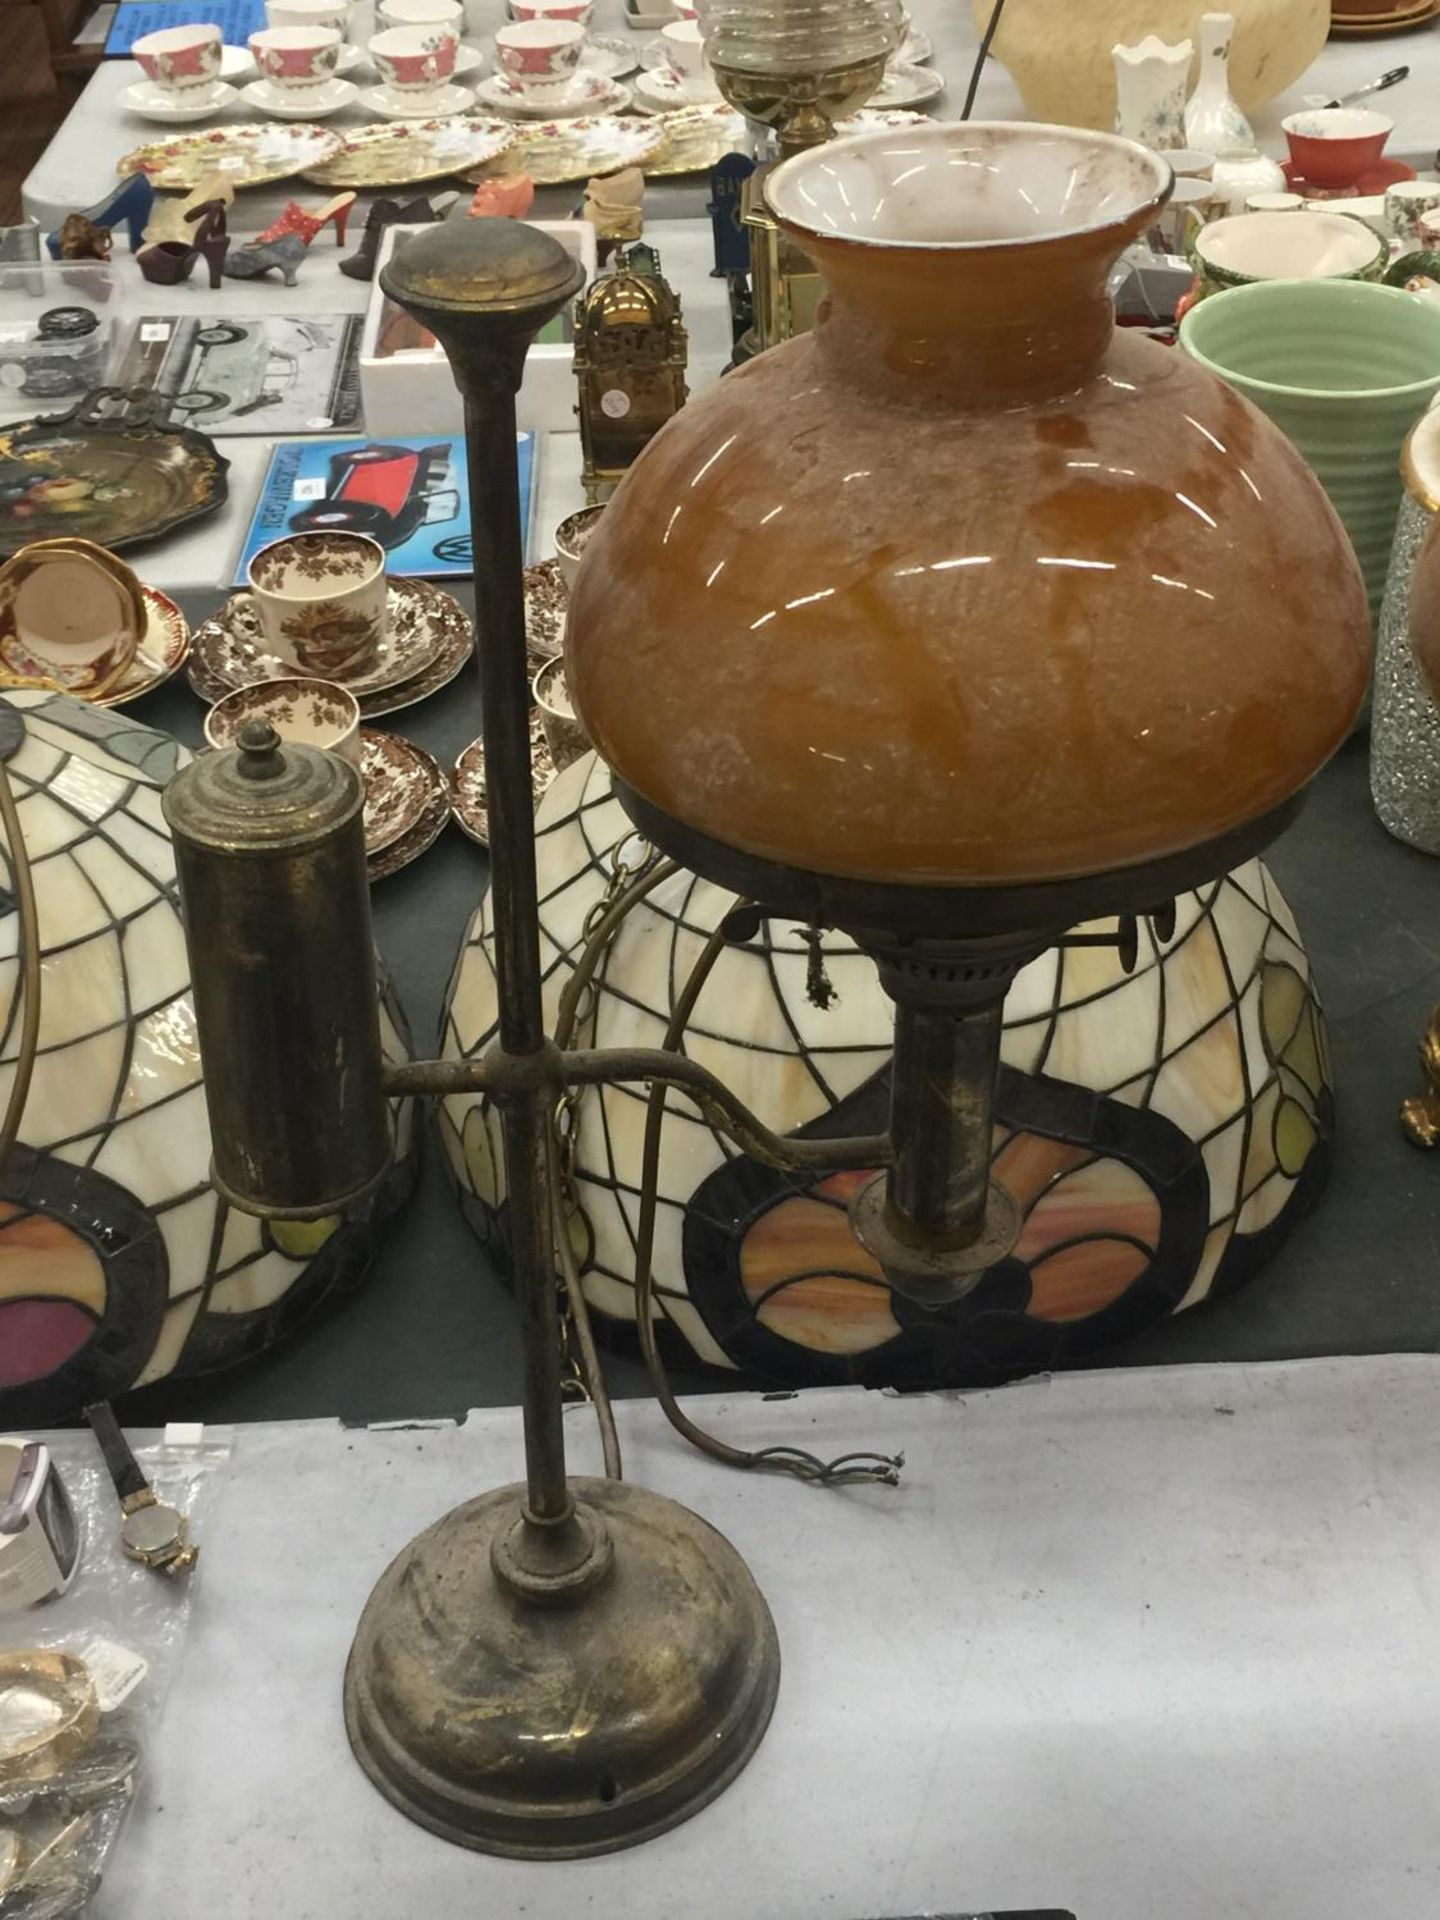 A PAIR OF VINTAGE BRASS OIL LAMPS WITH AMBER GLASS SHADES CONVERTED TO ELECTRICITY - WILL NEED - Image 2 of 9